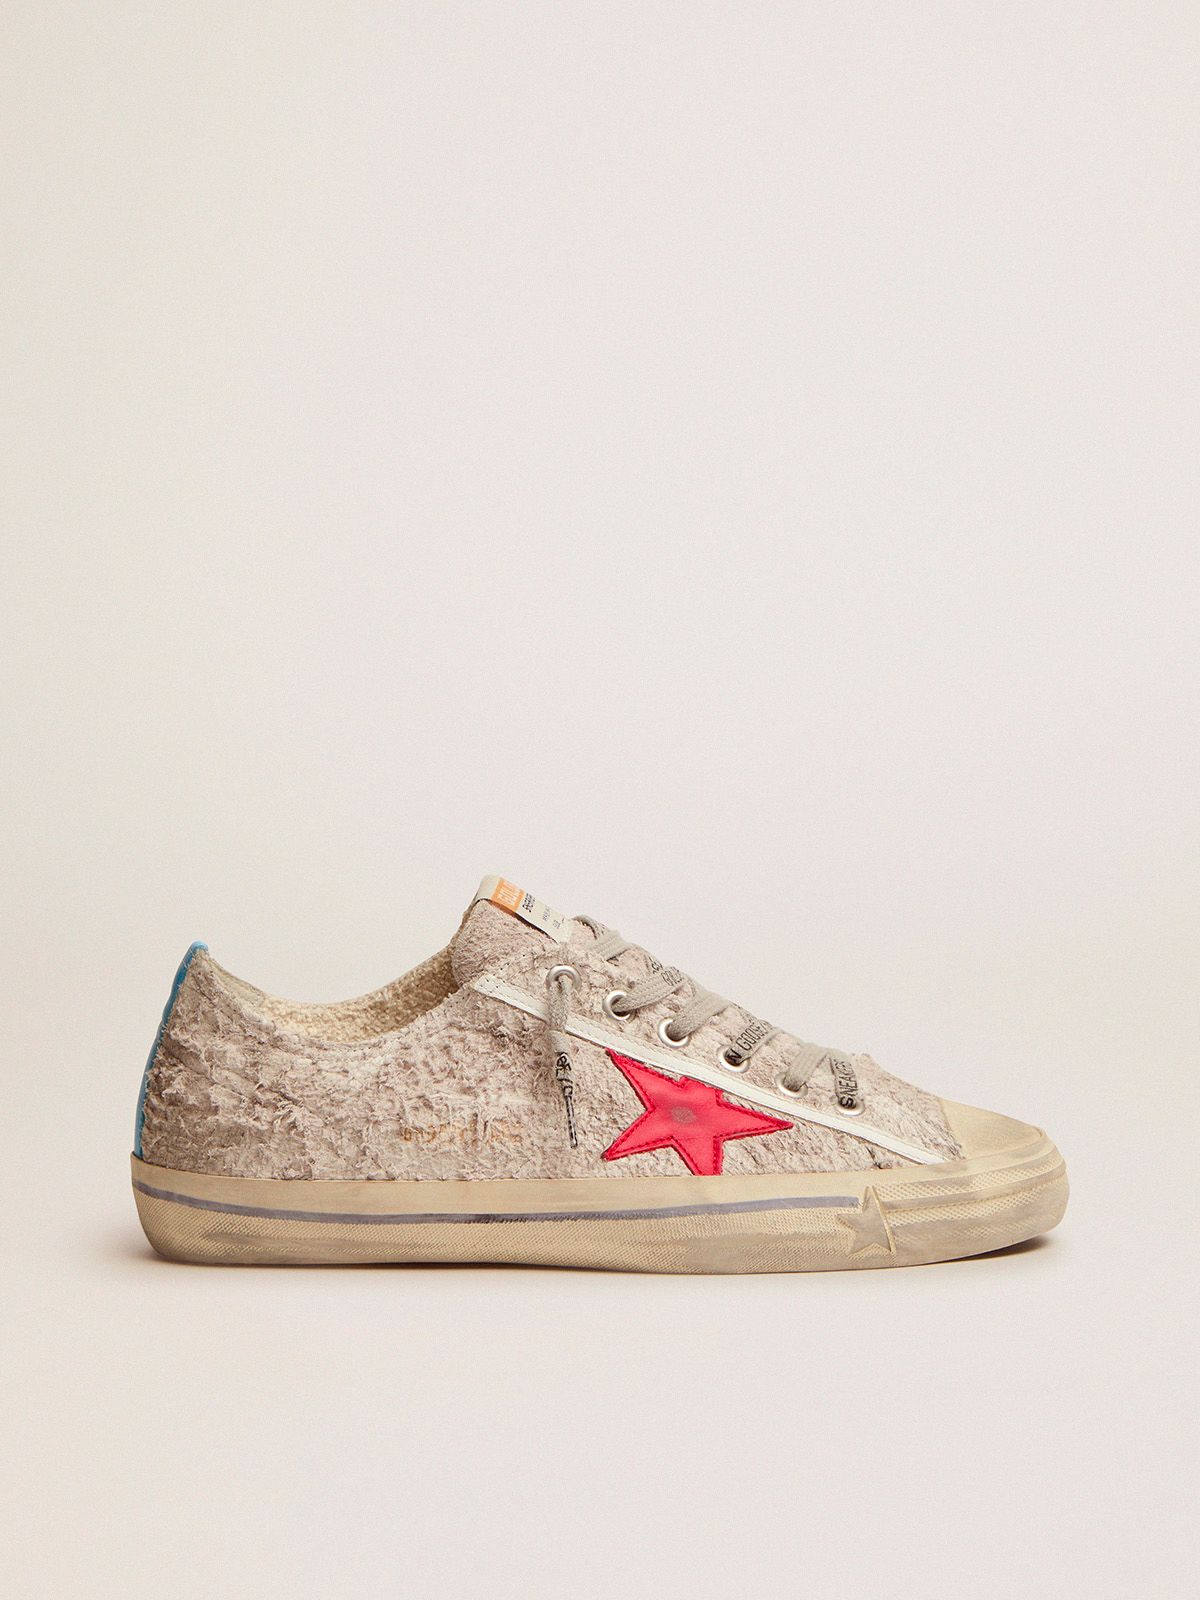 Golden Goose Saldo Uomo V-Star sneakers in white suede with red leather star